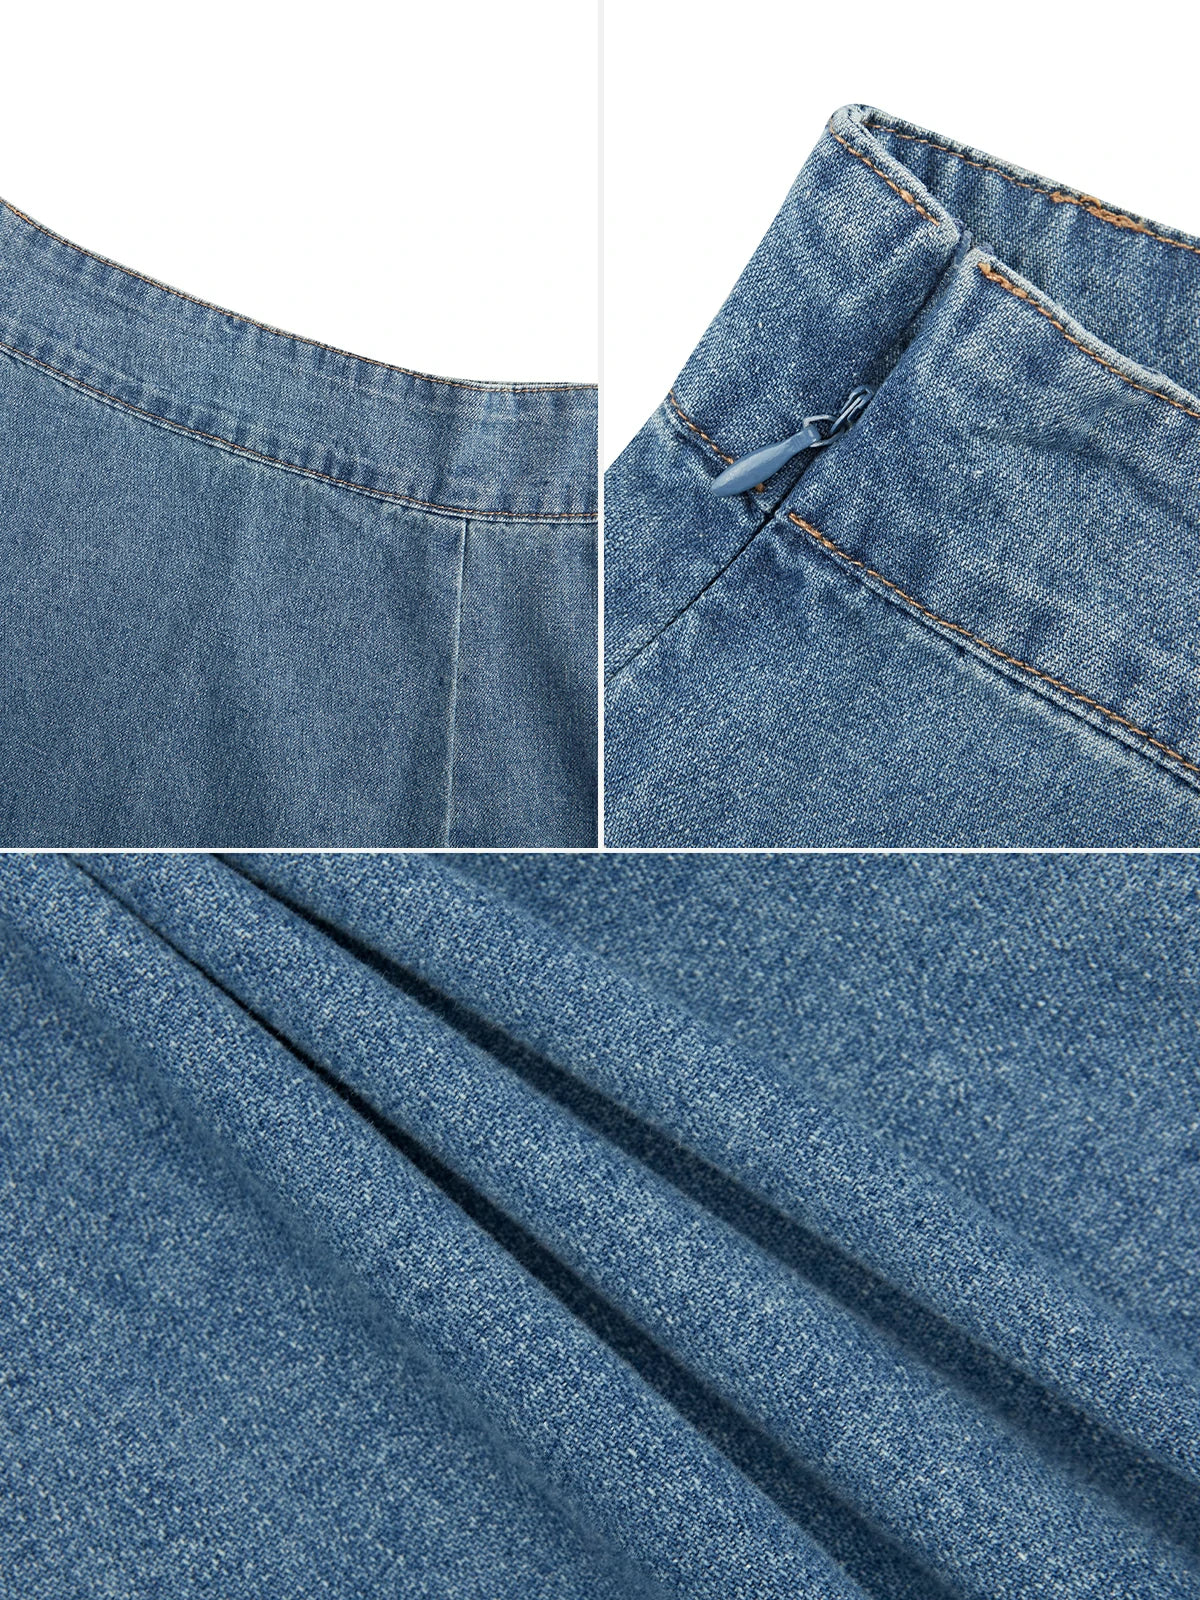 Everyday choice: A high-waisted blue denim A-line skirt, crafted with a classic design, and versatile fashion, ensuring both style and comfort.